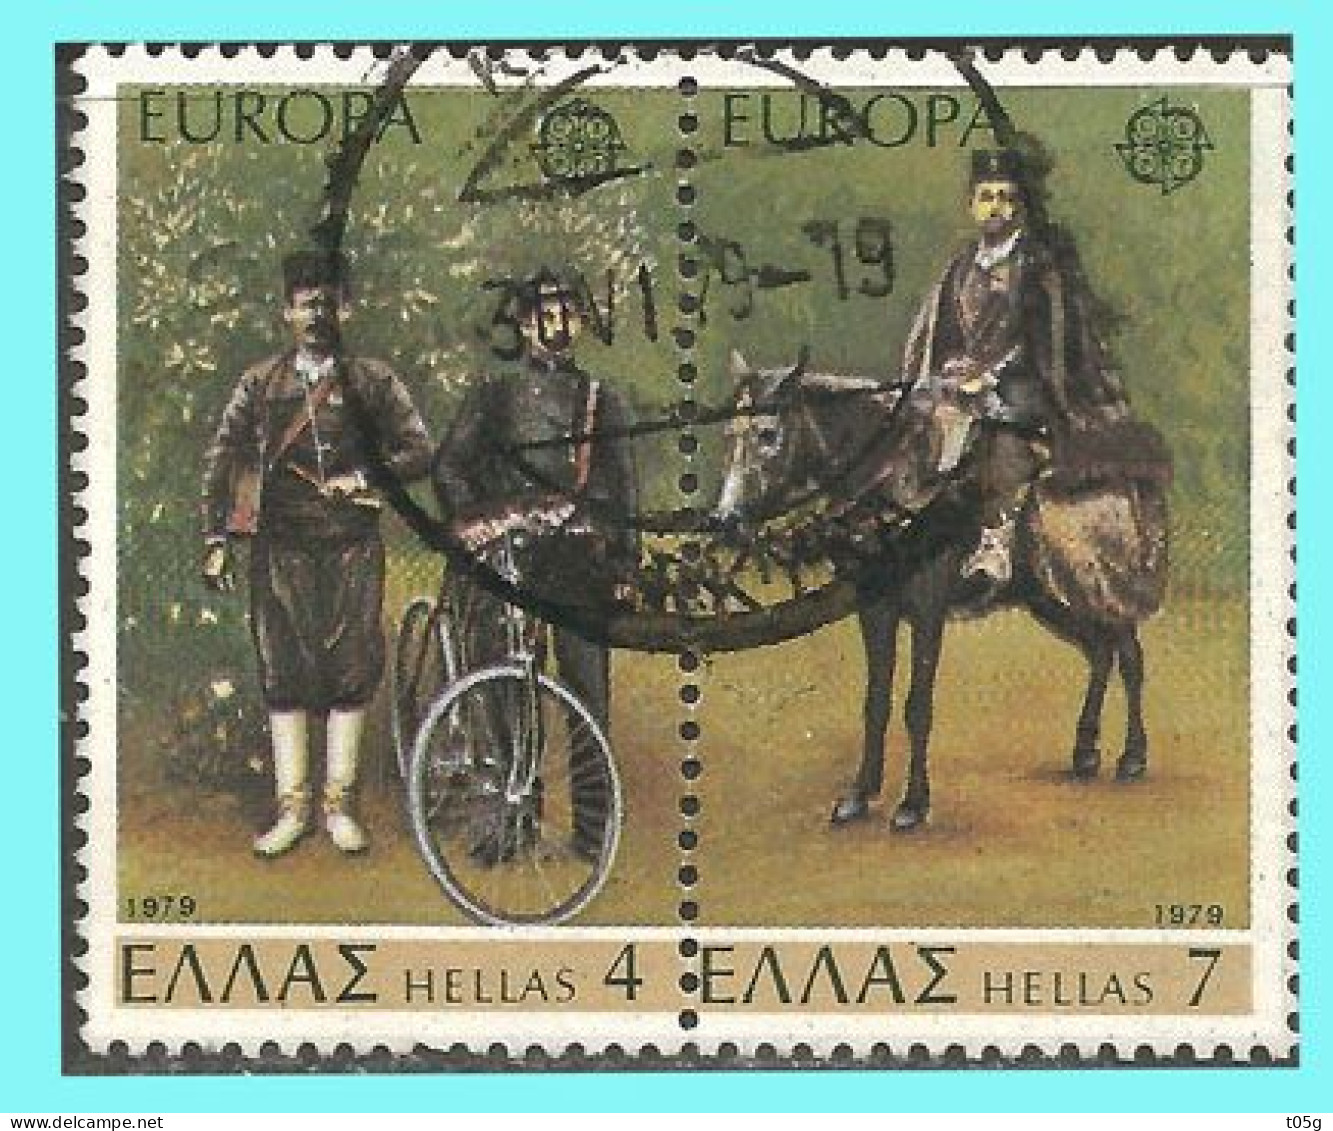 GREECE- GRECE - HELLAS 1979: See-tenant Compl.set used - Used Stamps